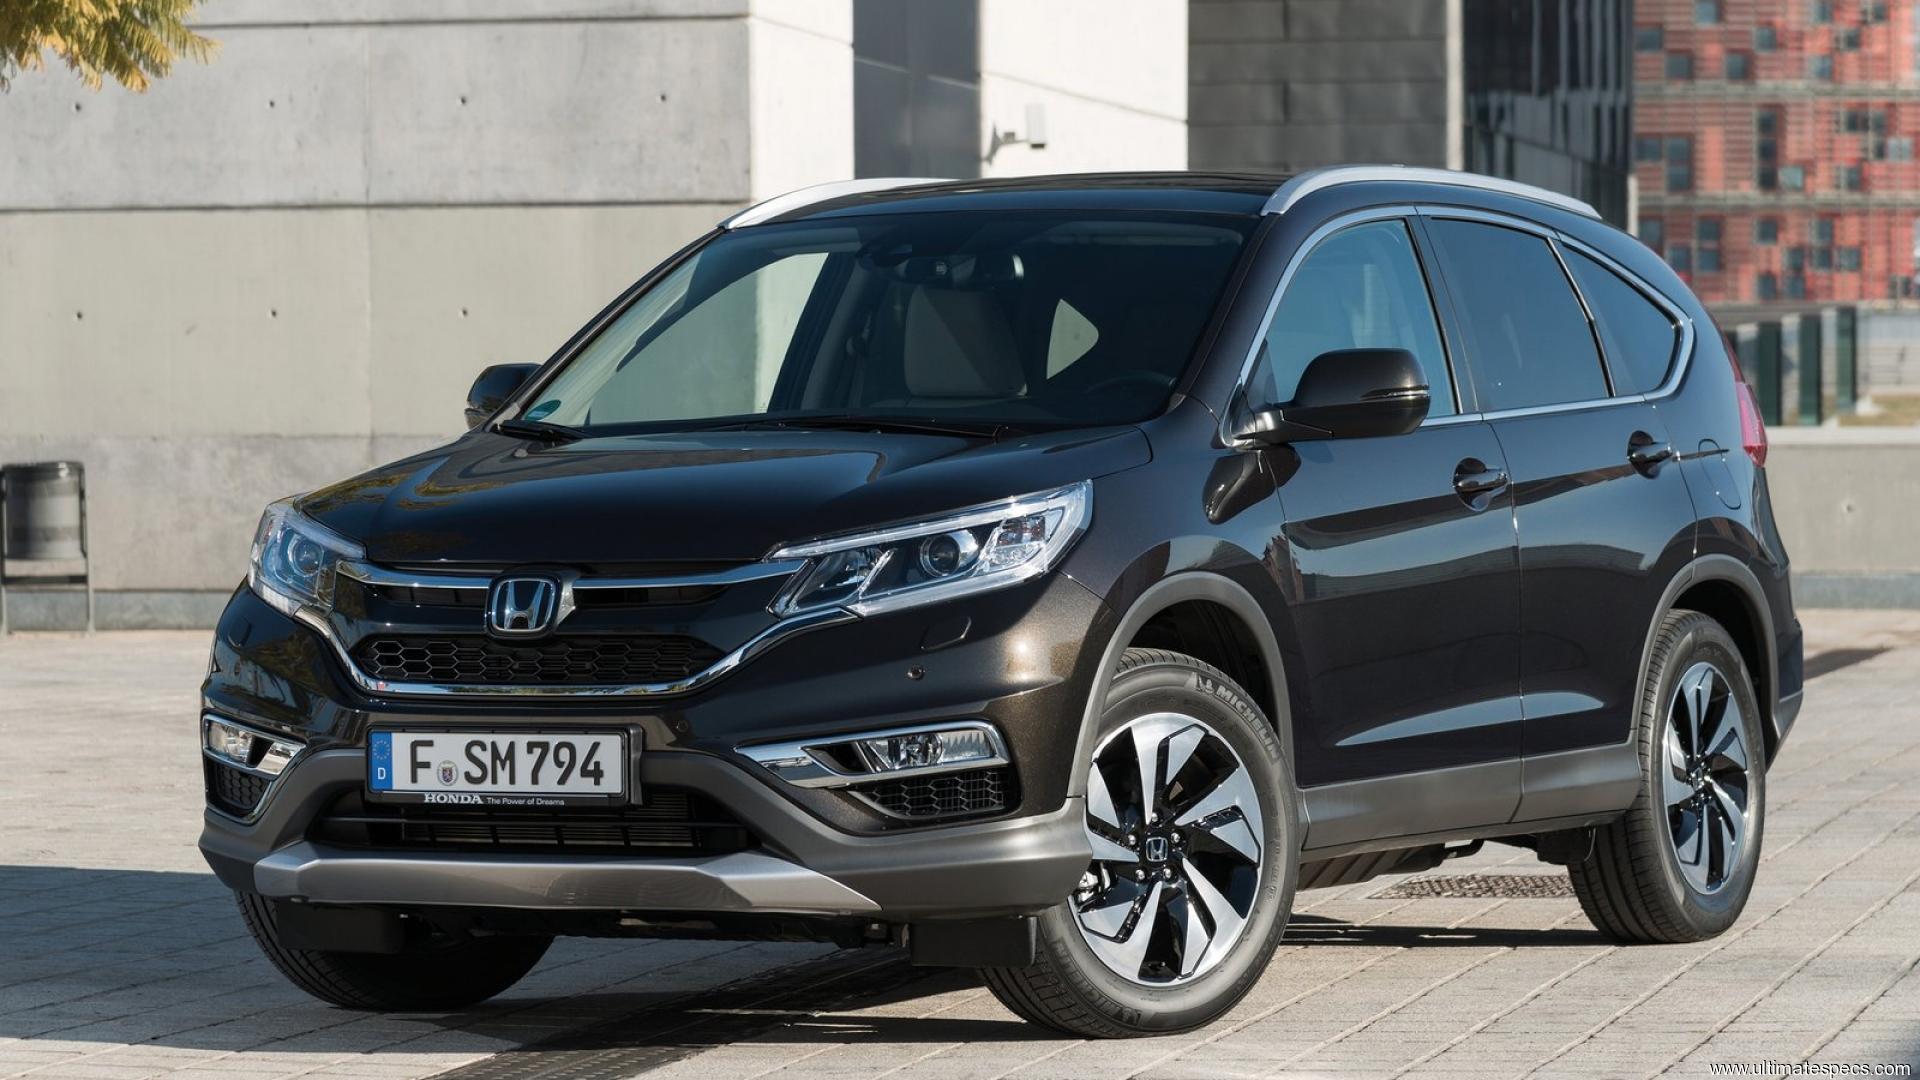 Honda CRV 4 2015 Images, pictures, gallery